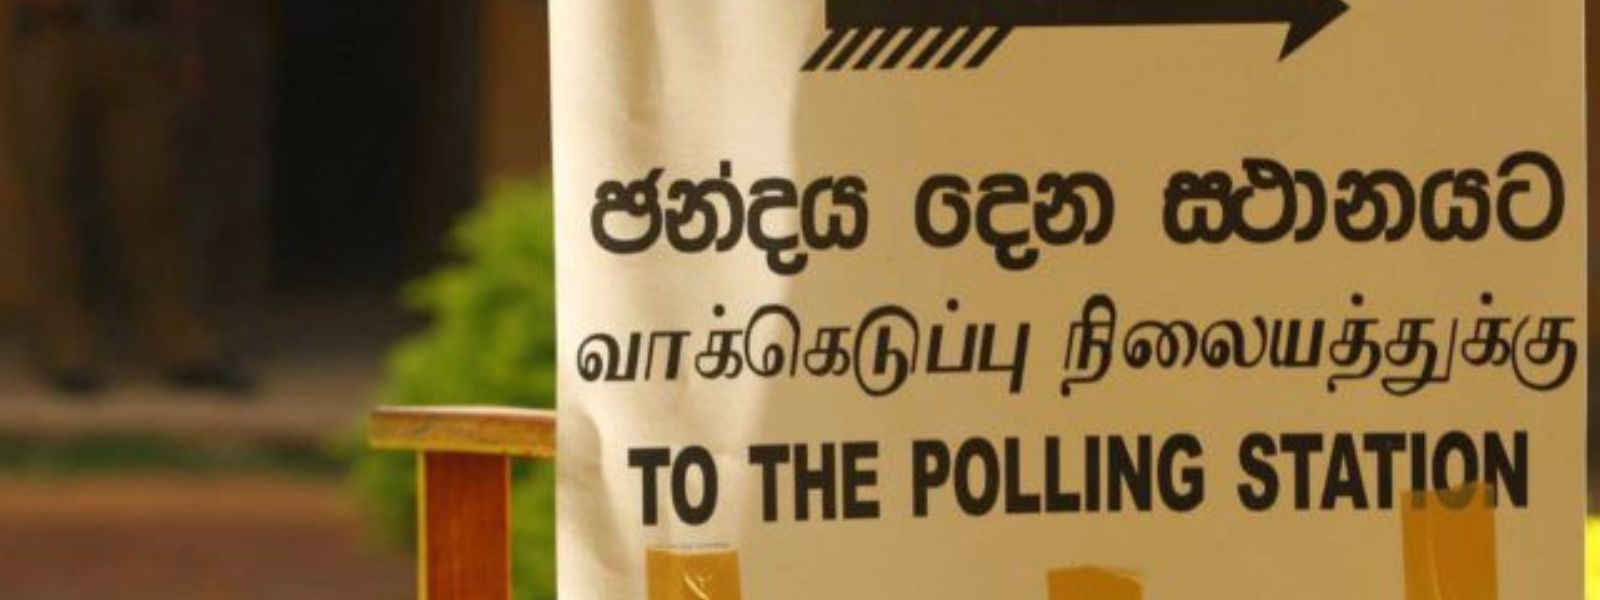 Jehan Perera: Prospects for elections continue to be bleak